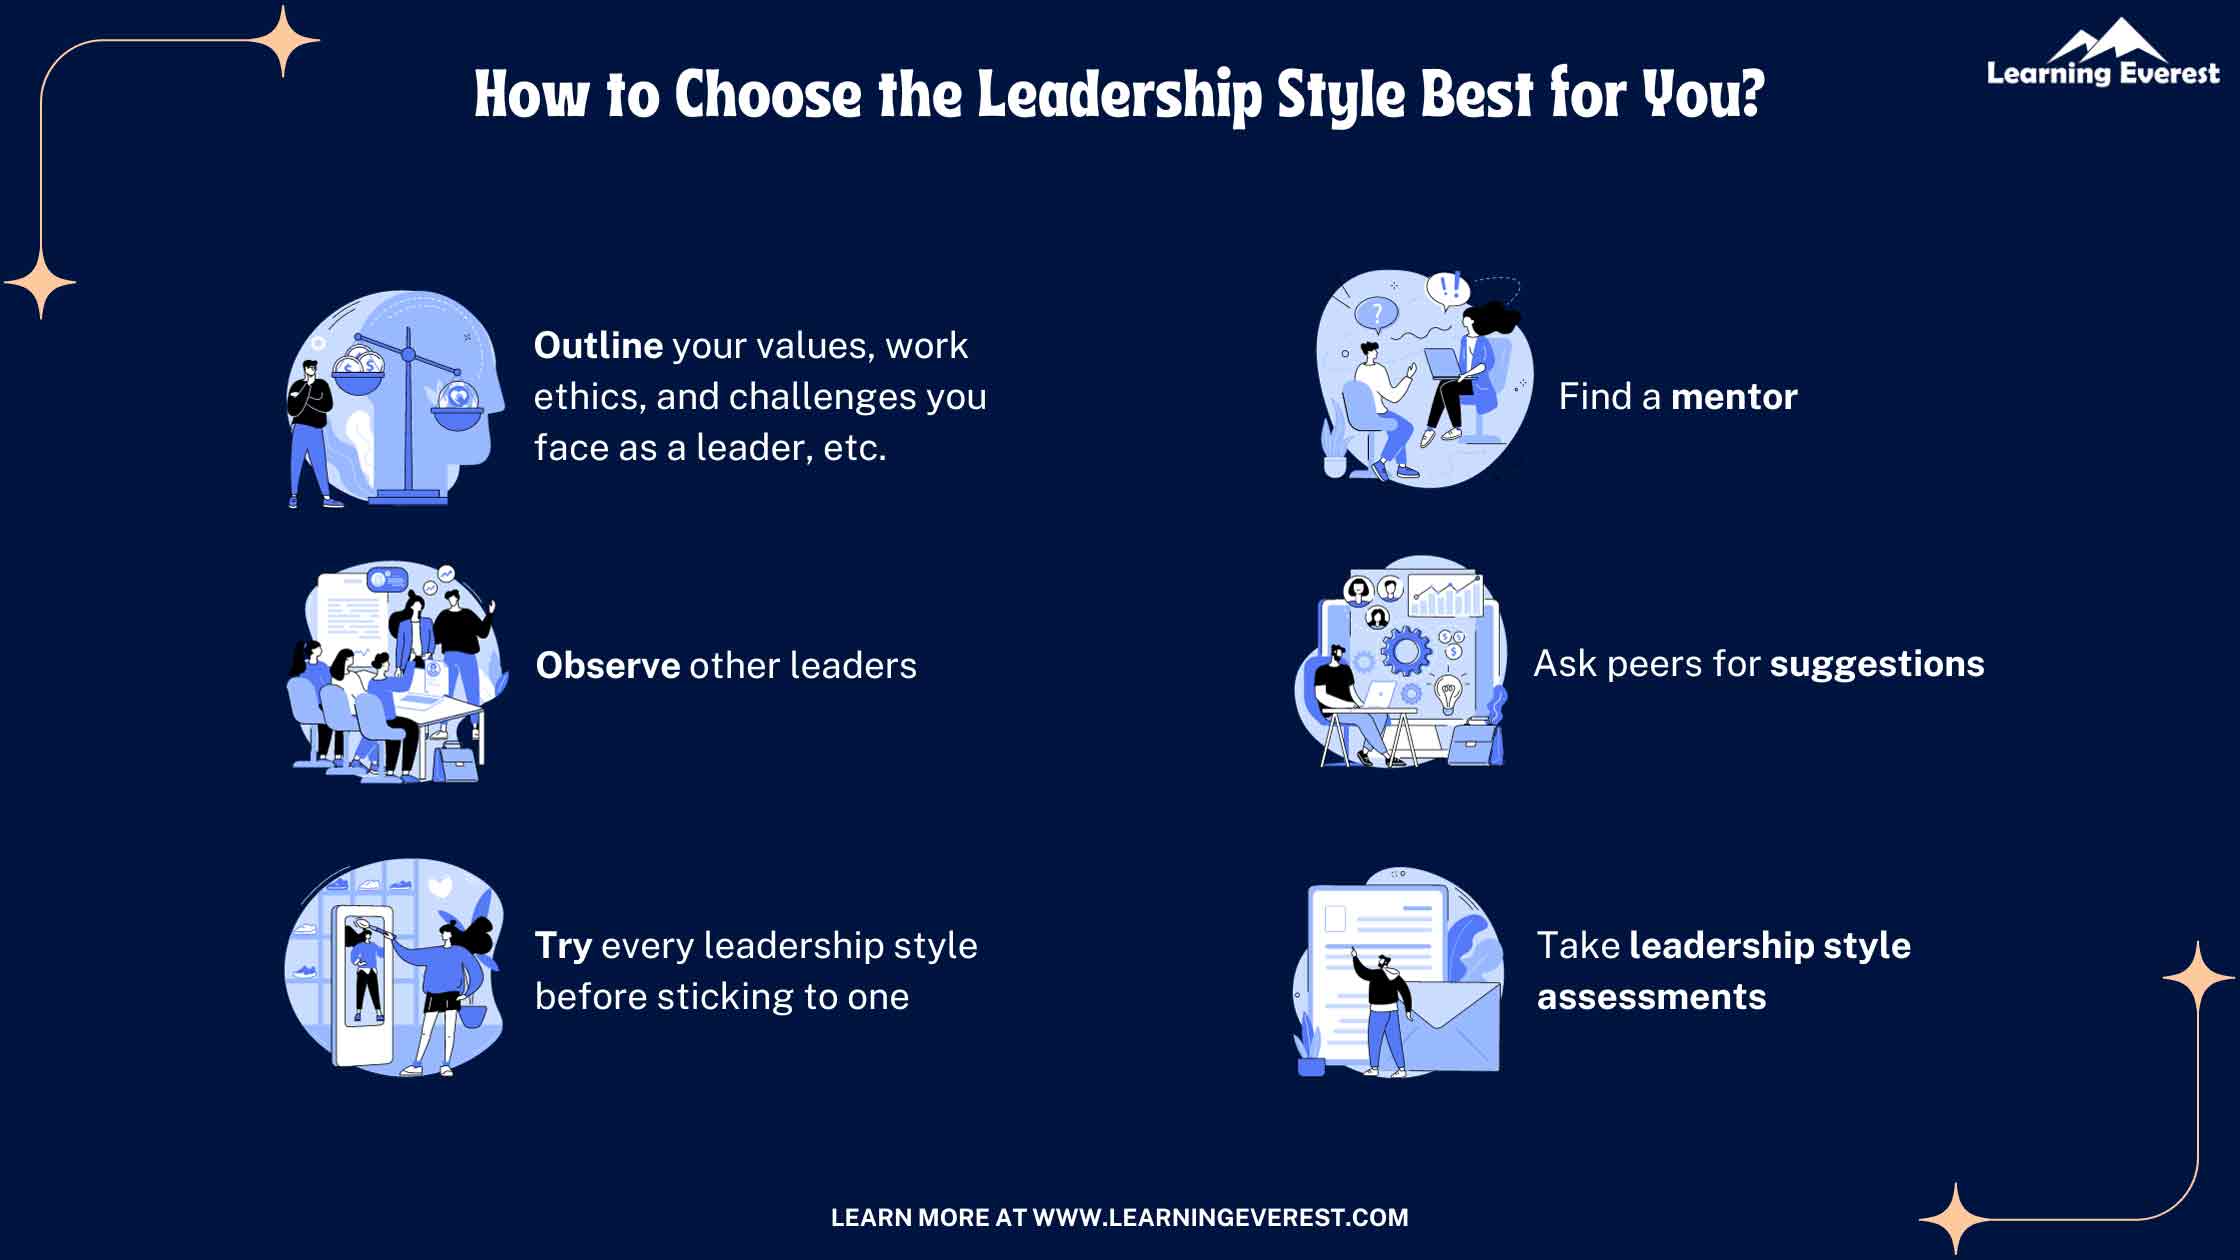 How to Choose the Leadership Style Best for You